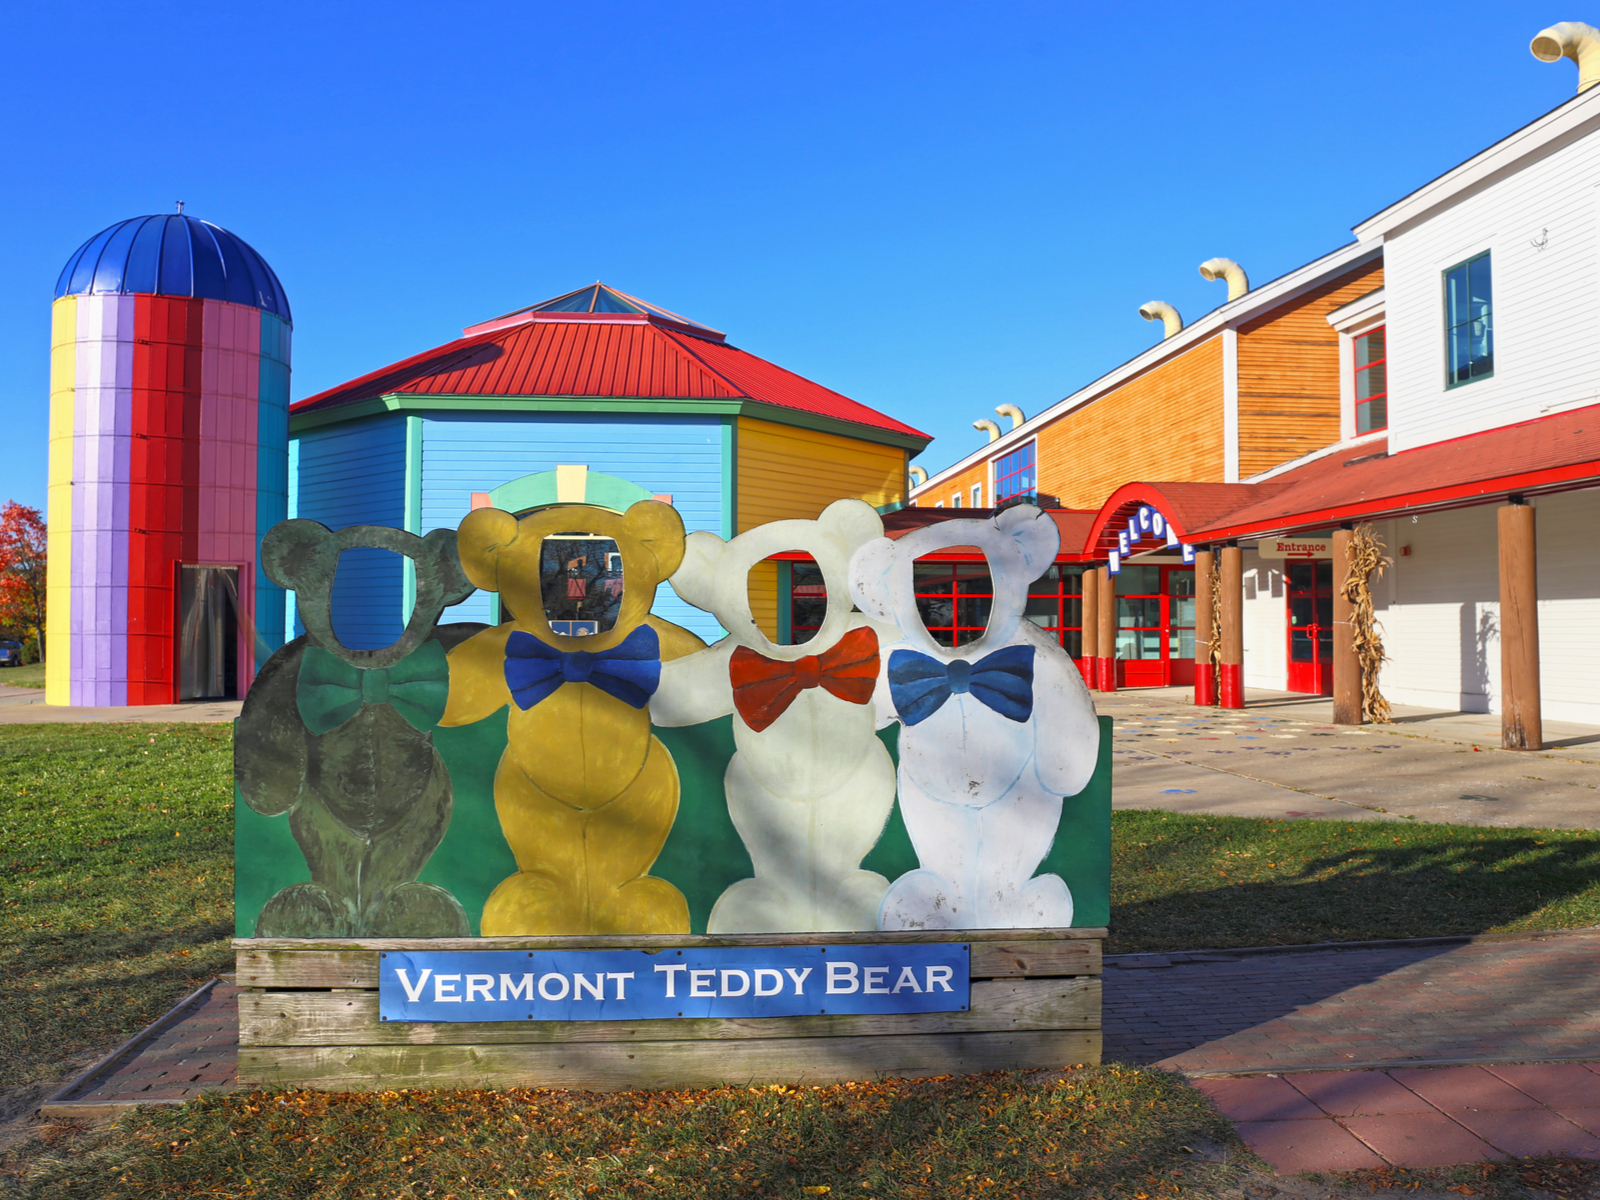 Vermont teddy bear factory, one of the best places to visit in Vermont